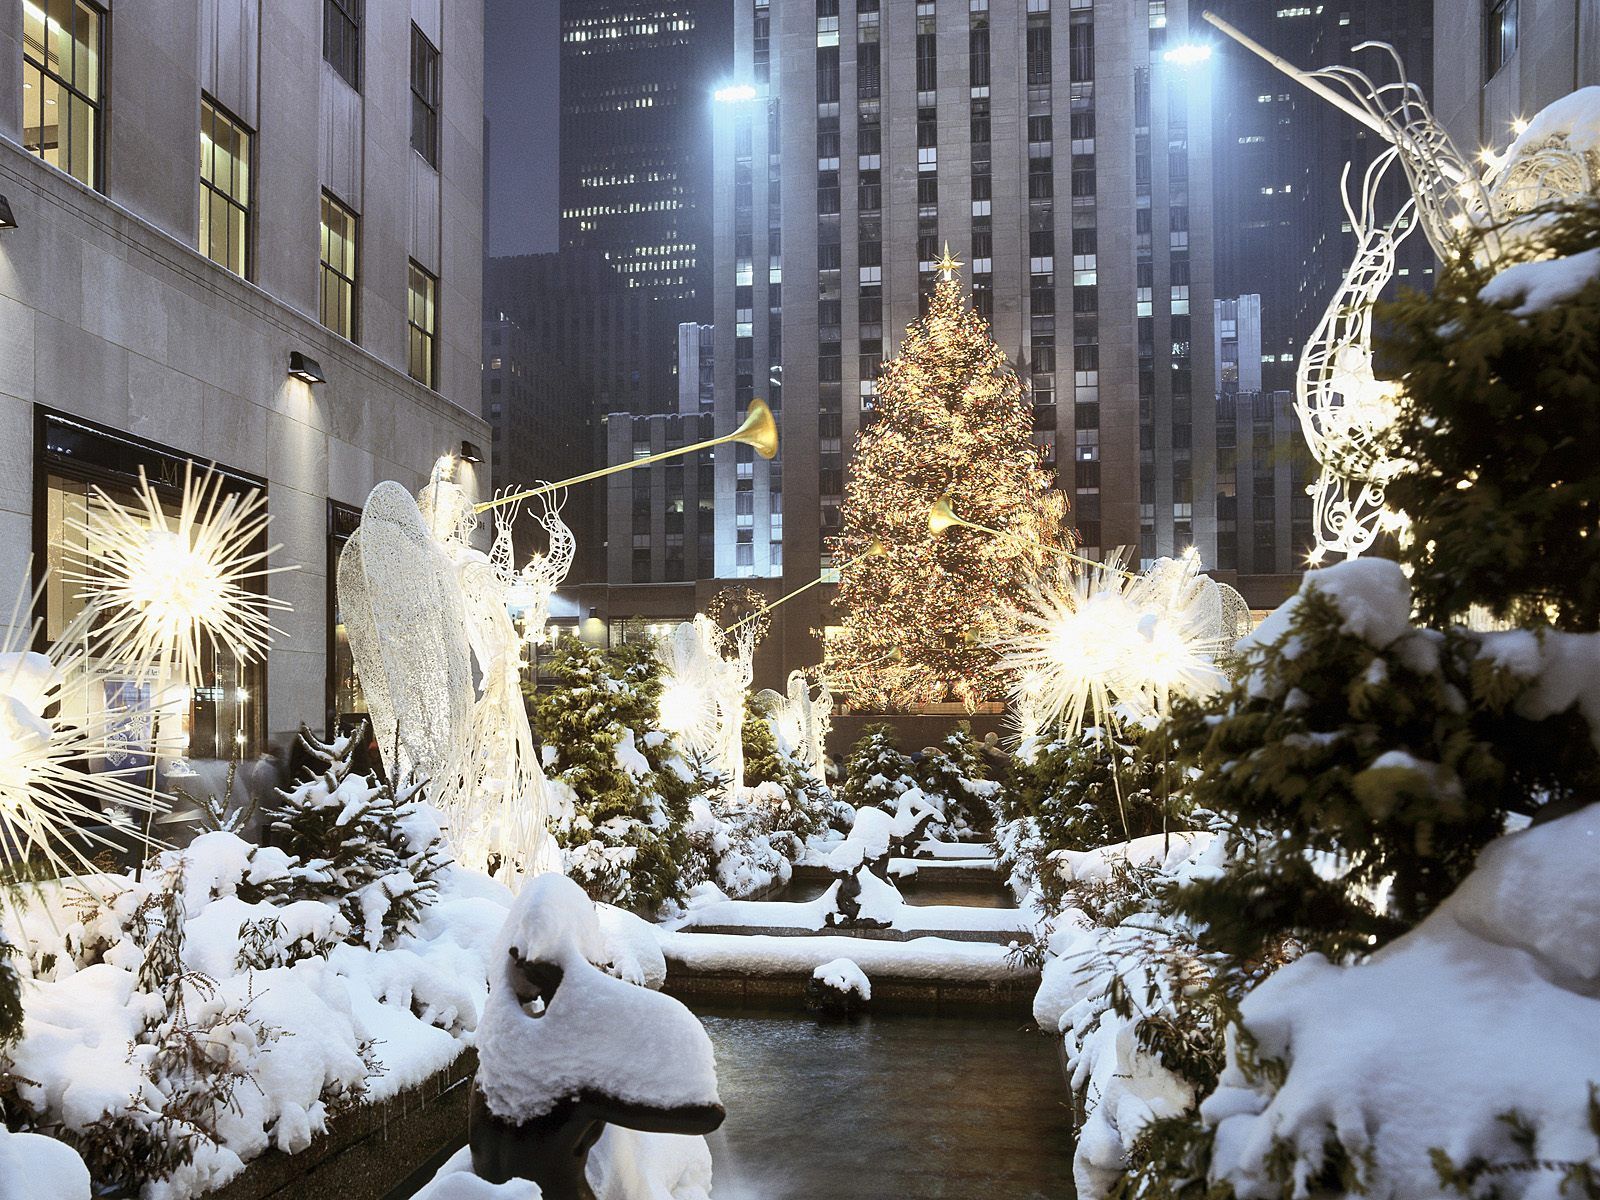 Magical Must See Spots During Christmas In New York City. New York Christmas, New York Christmas Tree, New York City Christmas